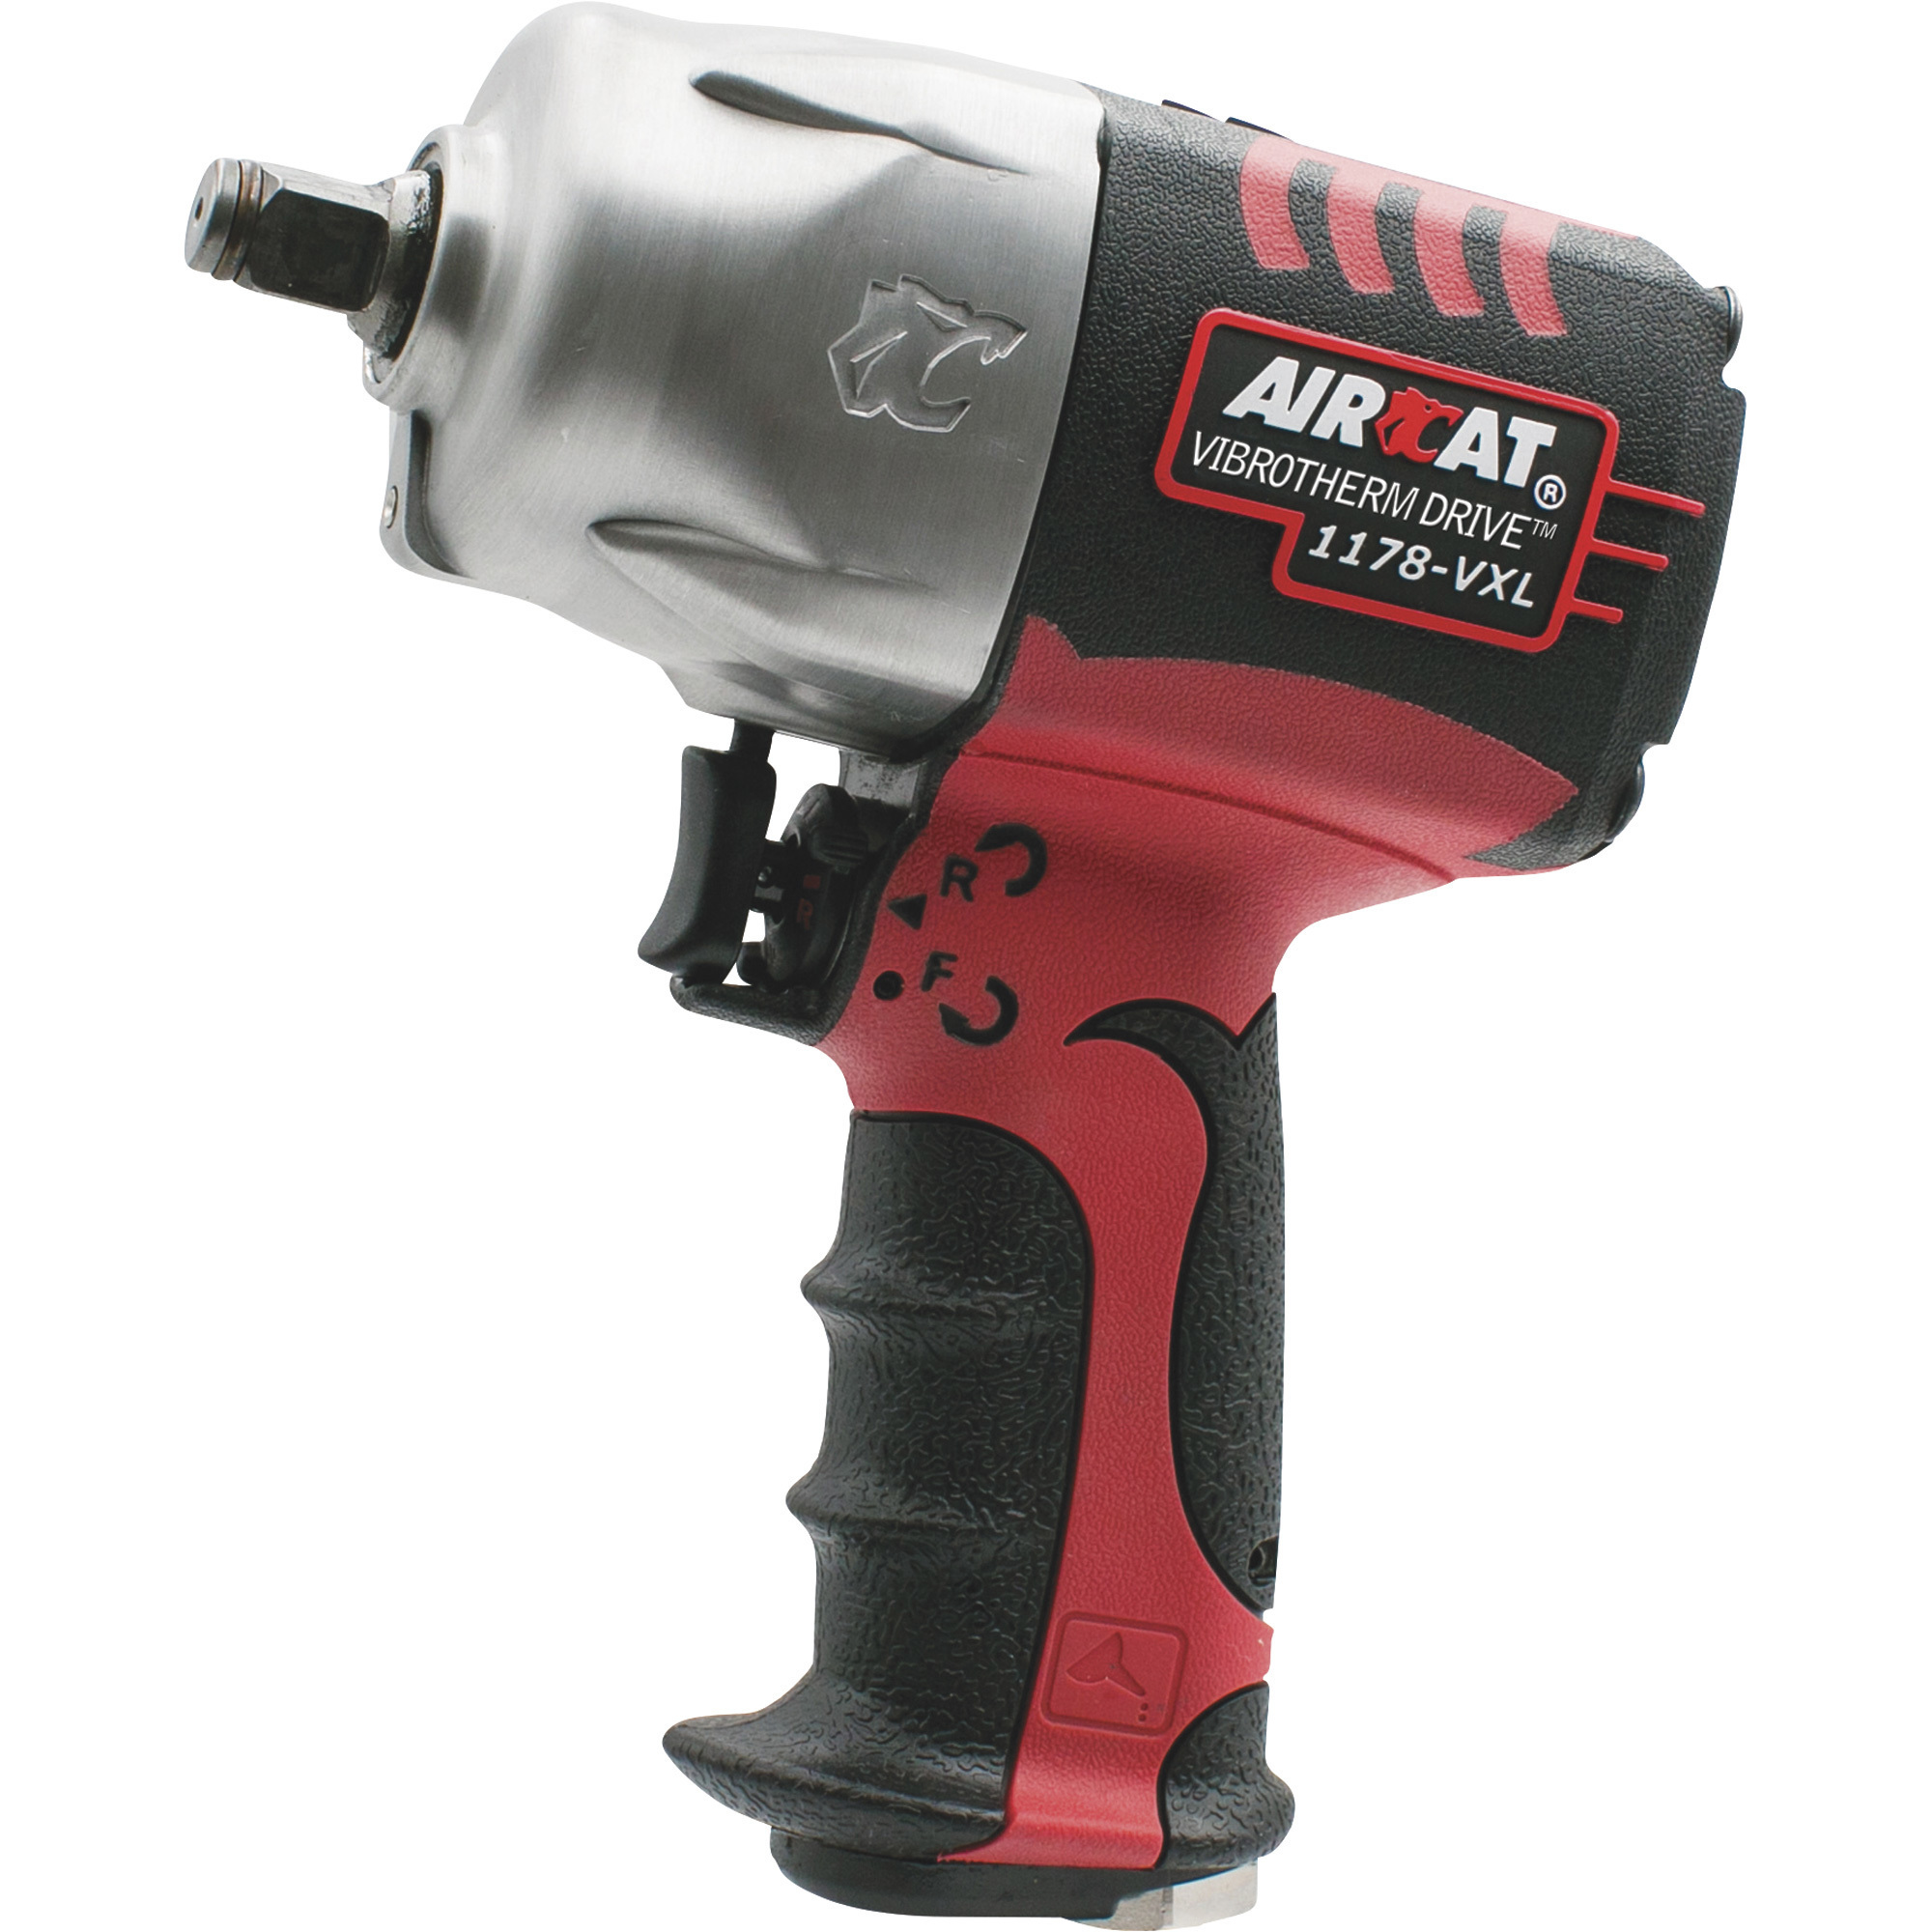 AIRCAT Vibrotherm Drive Composite Air Impact Wrench, 1/2Inch Drive, 1300ft./lbs. Torque, Model 1178-VXL